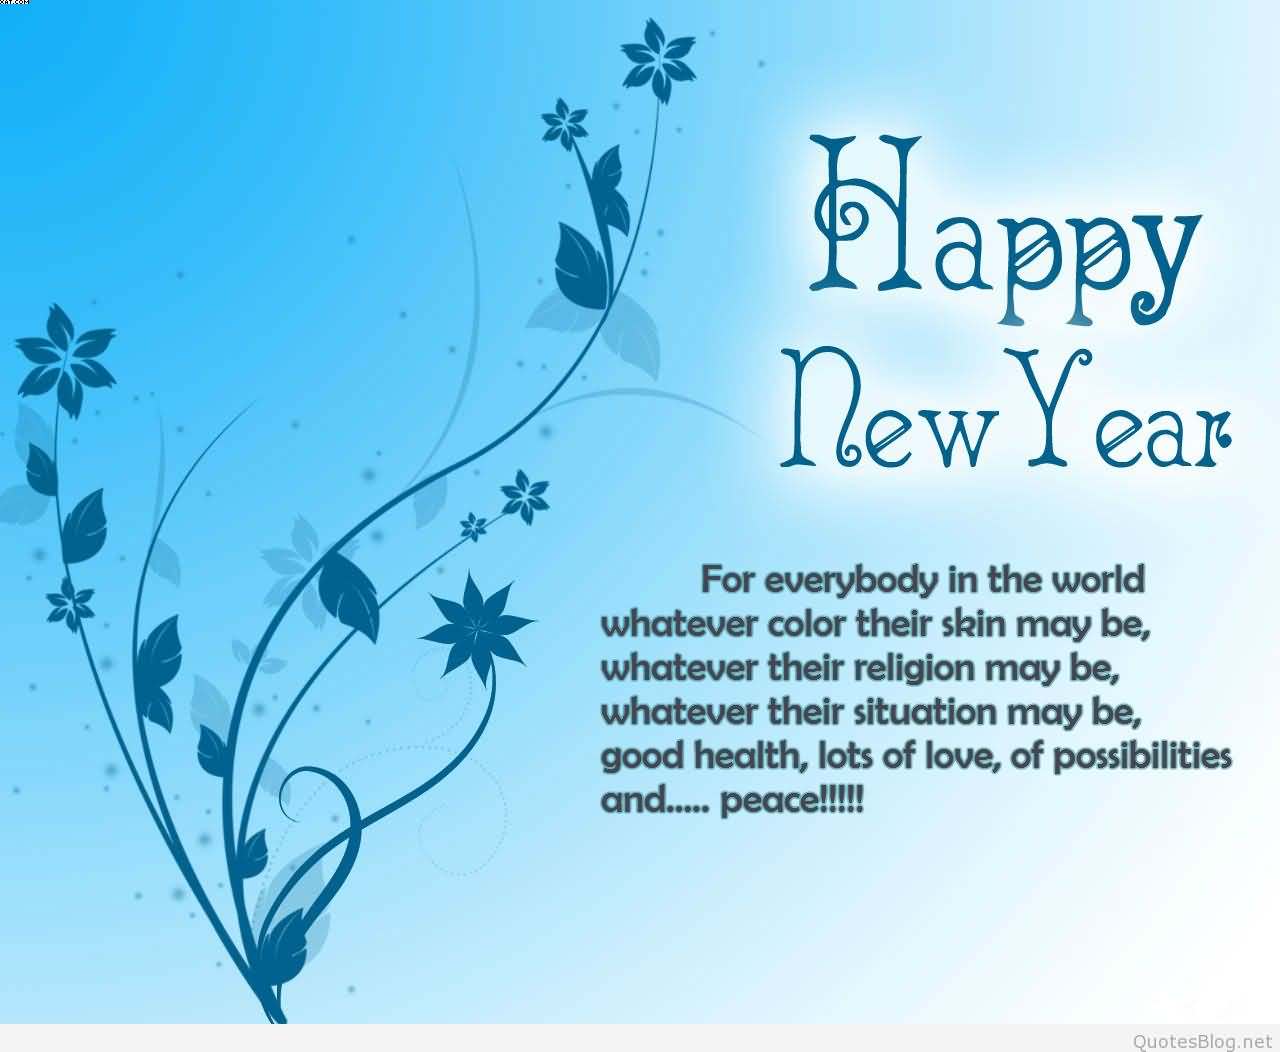 Happy new year wishes ecard picture